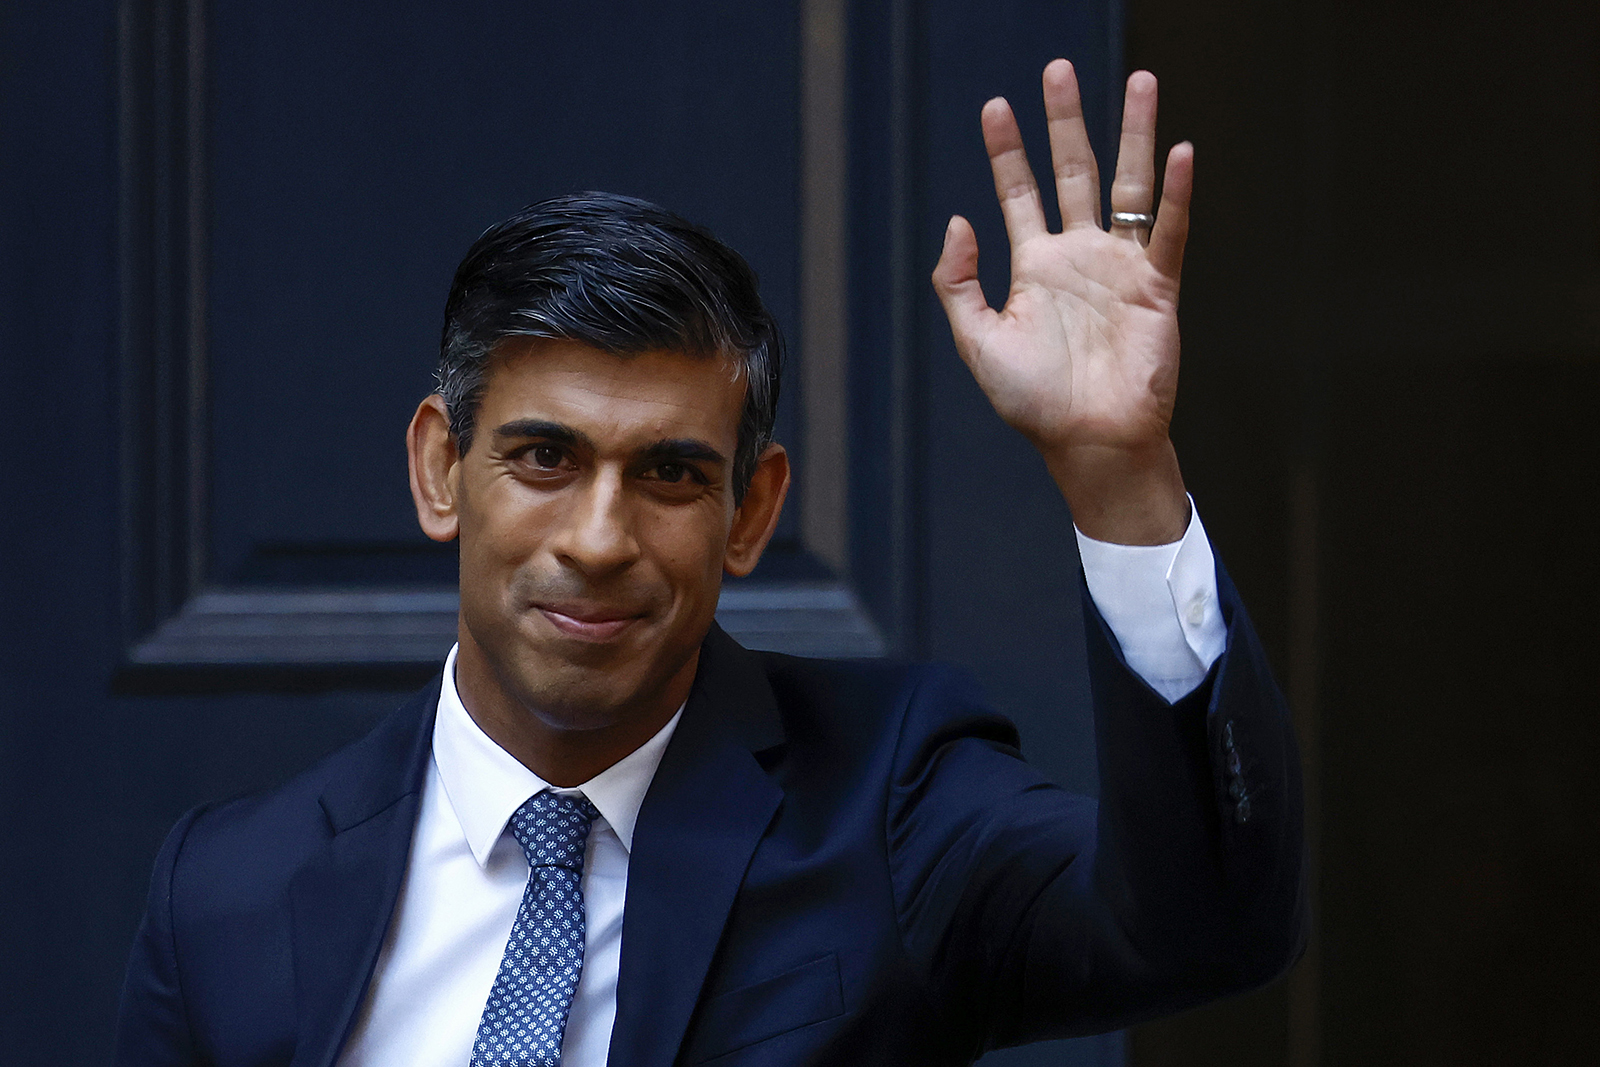 Rishi Sunak waves as he departs Conservative Party Headquarters today in London.